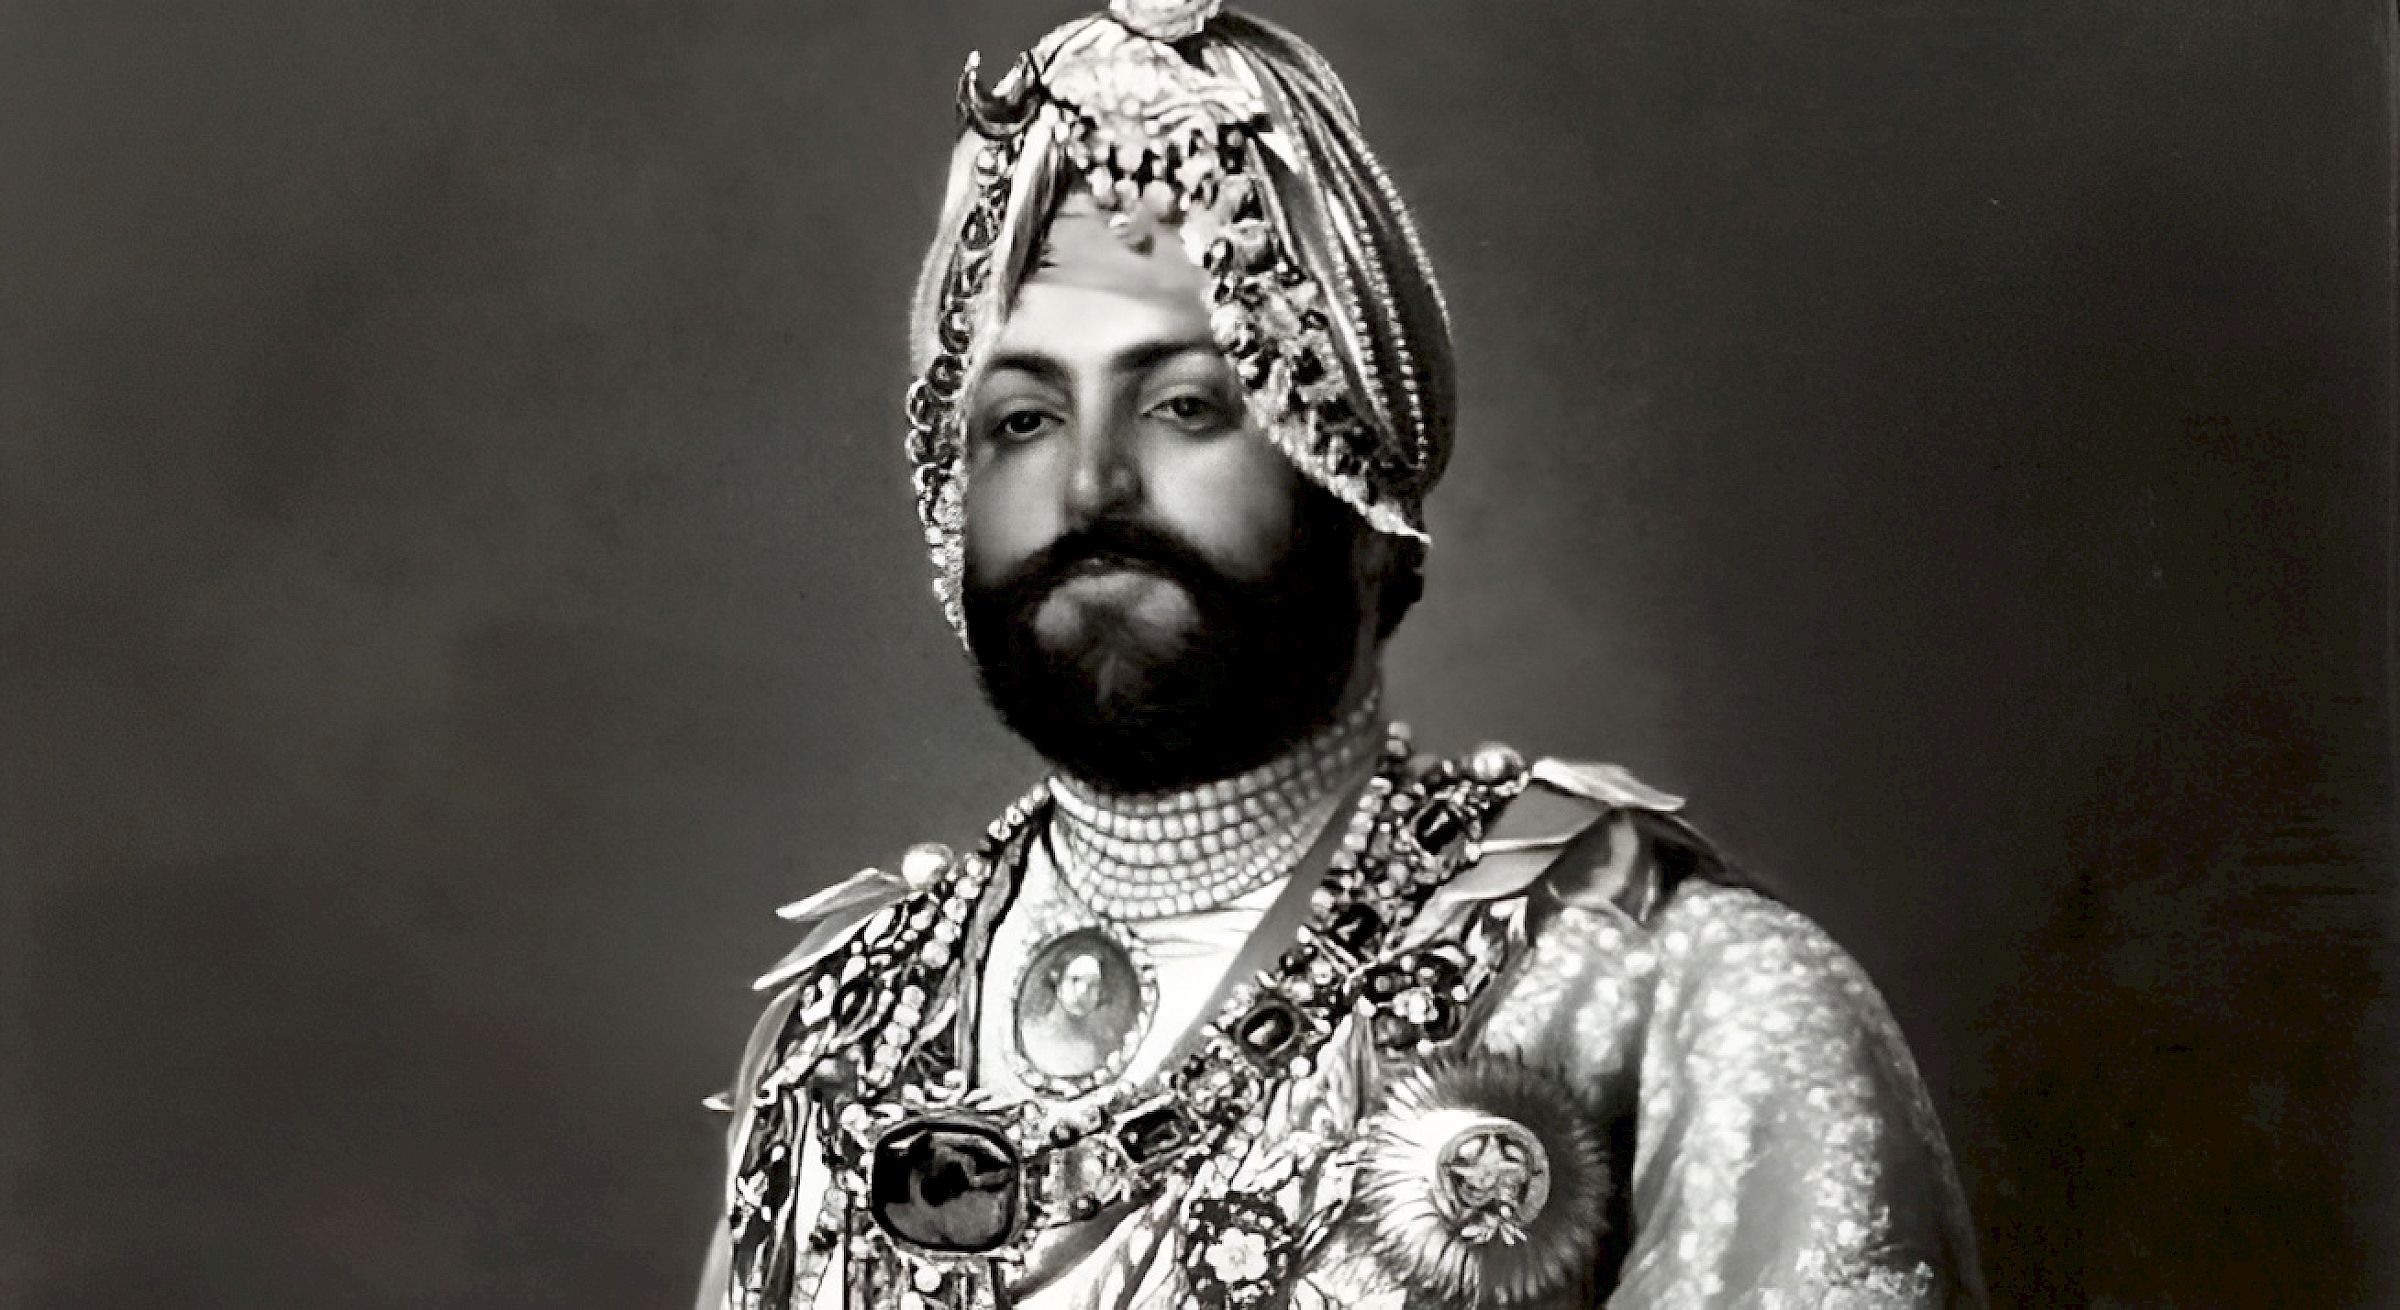 Maharajah Duleep Bassi dressed for a State function, c. 1875, oil painting by Capt. Goldingham of London.